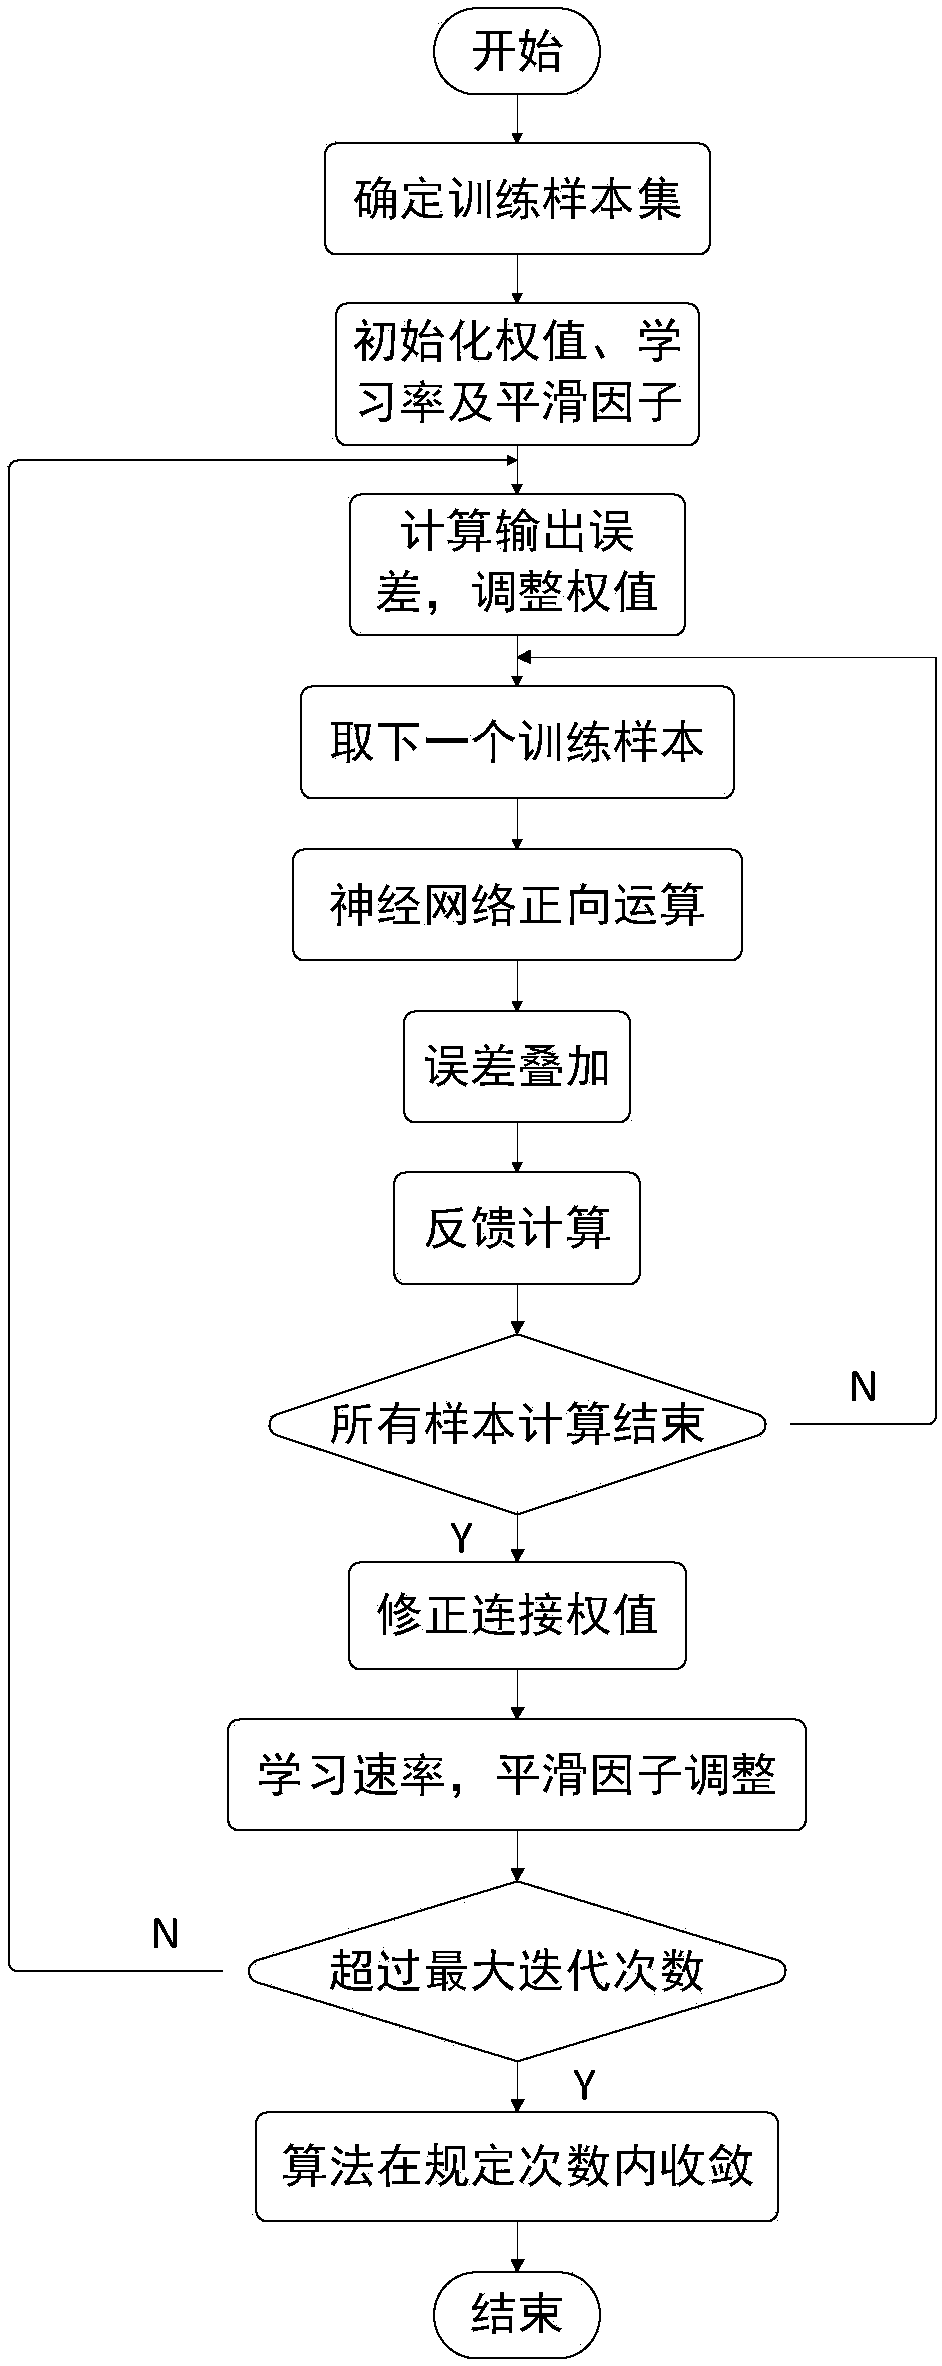 Energy supply feedback and meteorology factor thermal load prediction method